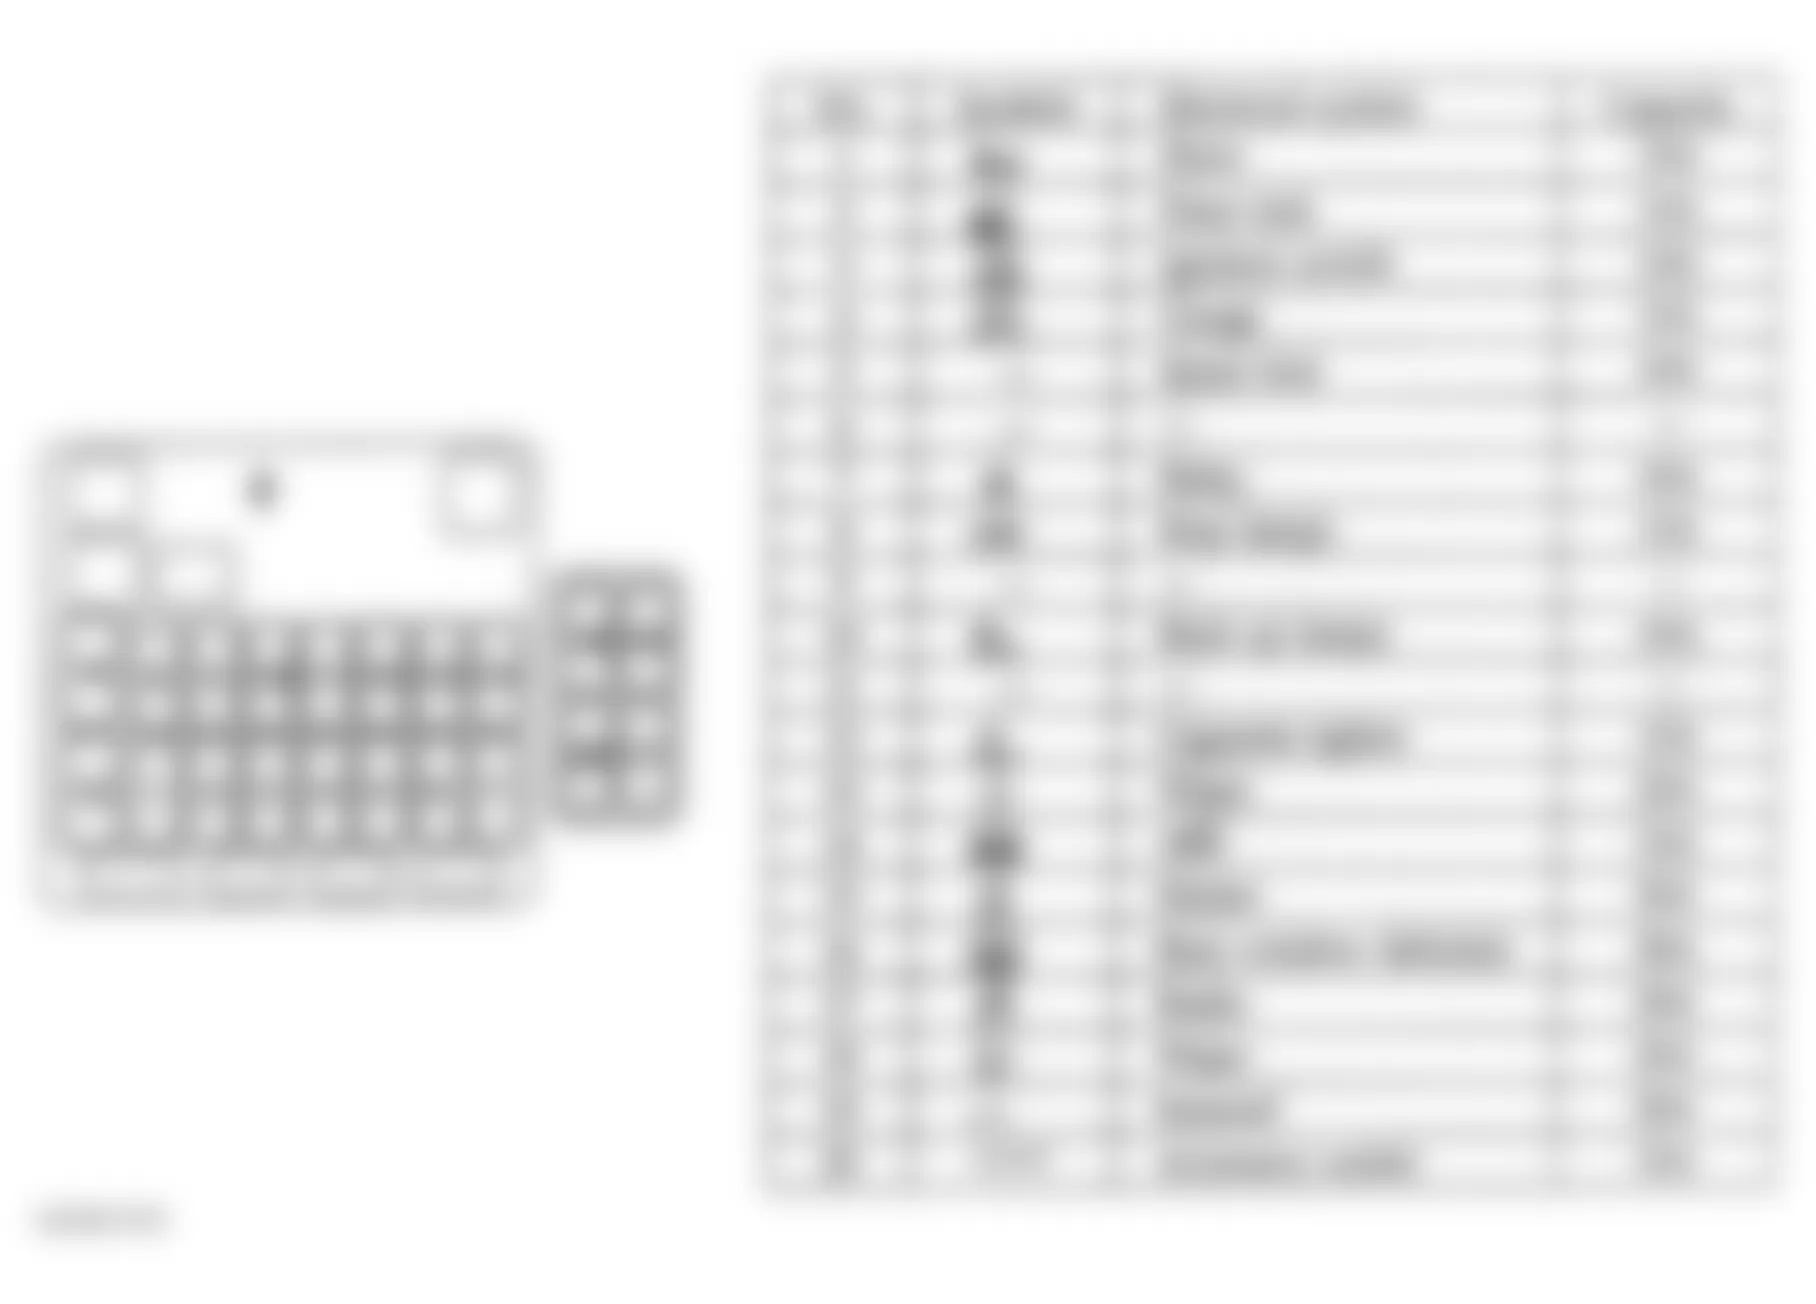 Chrysler Sebring LX 2002 - Component Locations -  Passenger Compartment Fuse Block Legend (From Owners Manual)